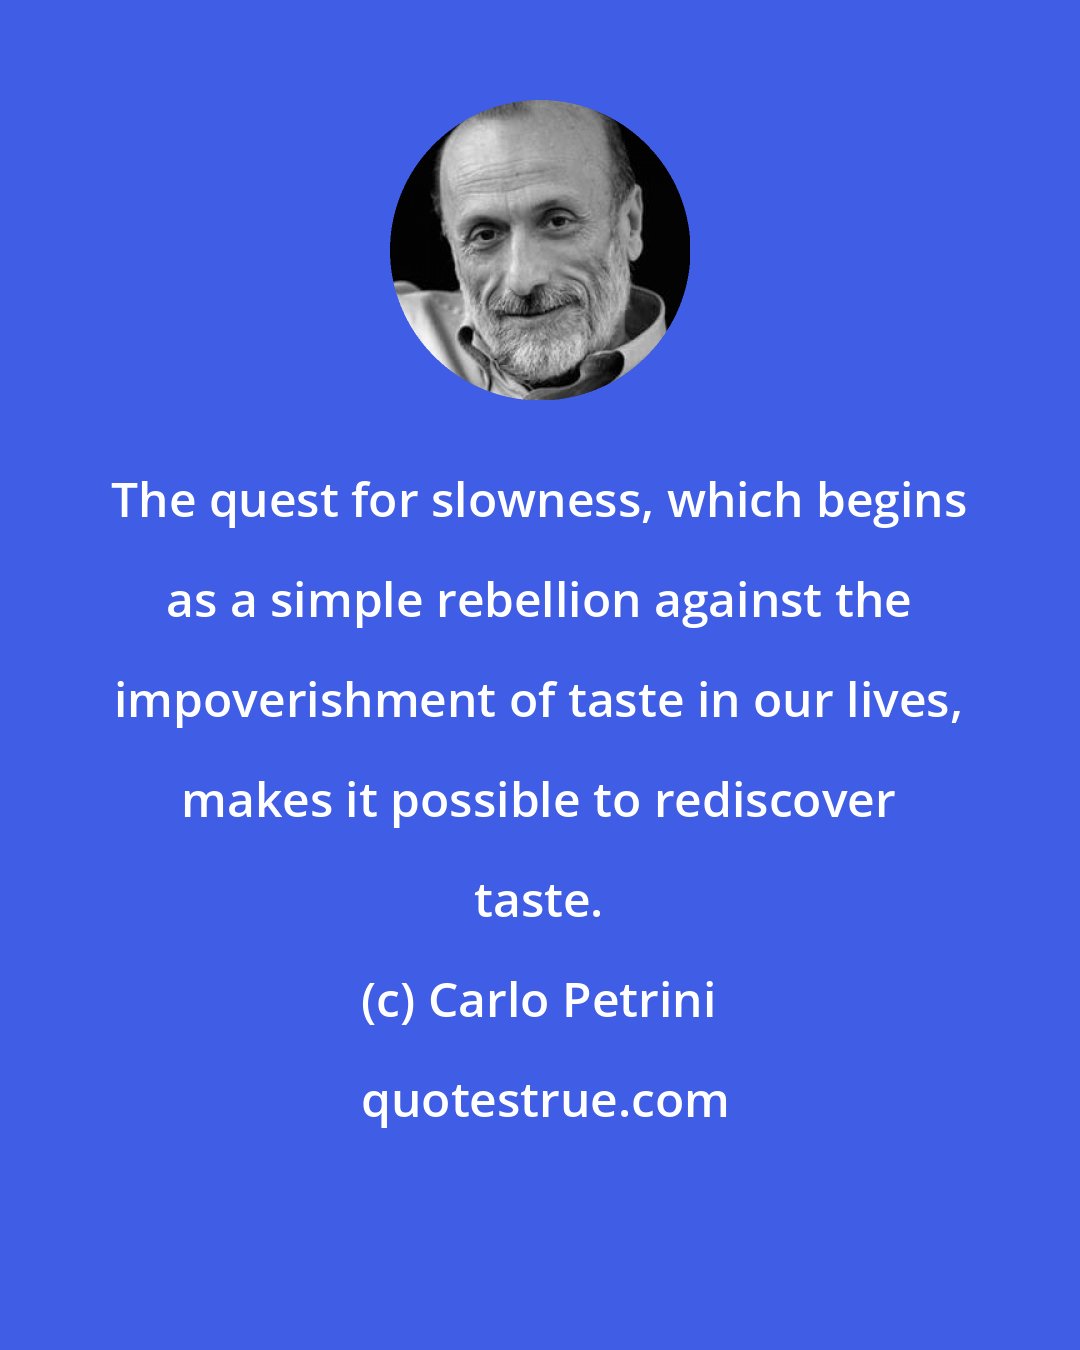 Carlo Petrini: The quest for slowness, which begins as a simple rebellion against the impoverishment of taste in our lives, makes it possible to rediscover taste.